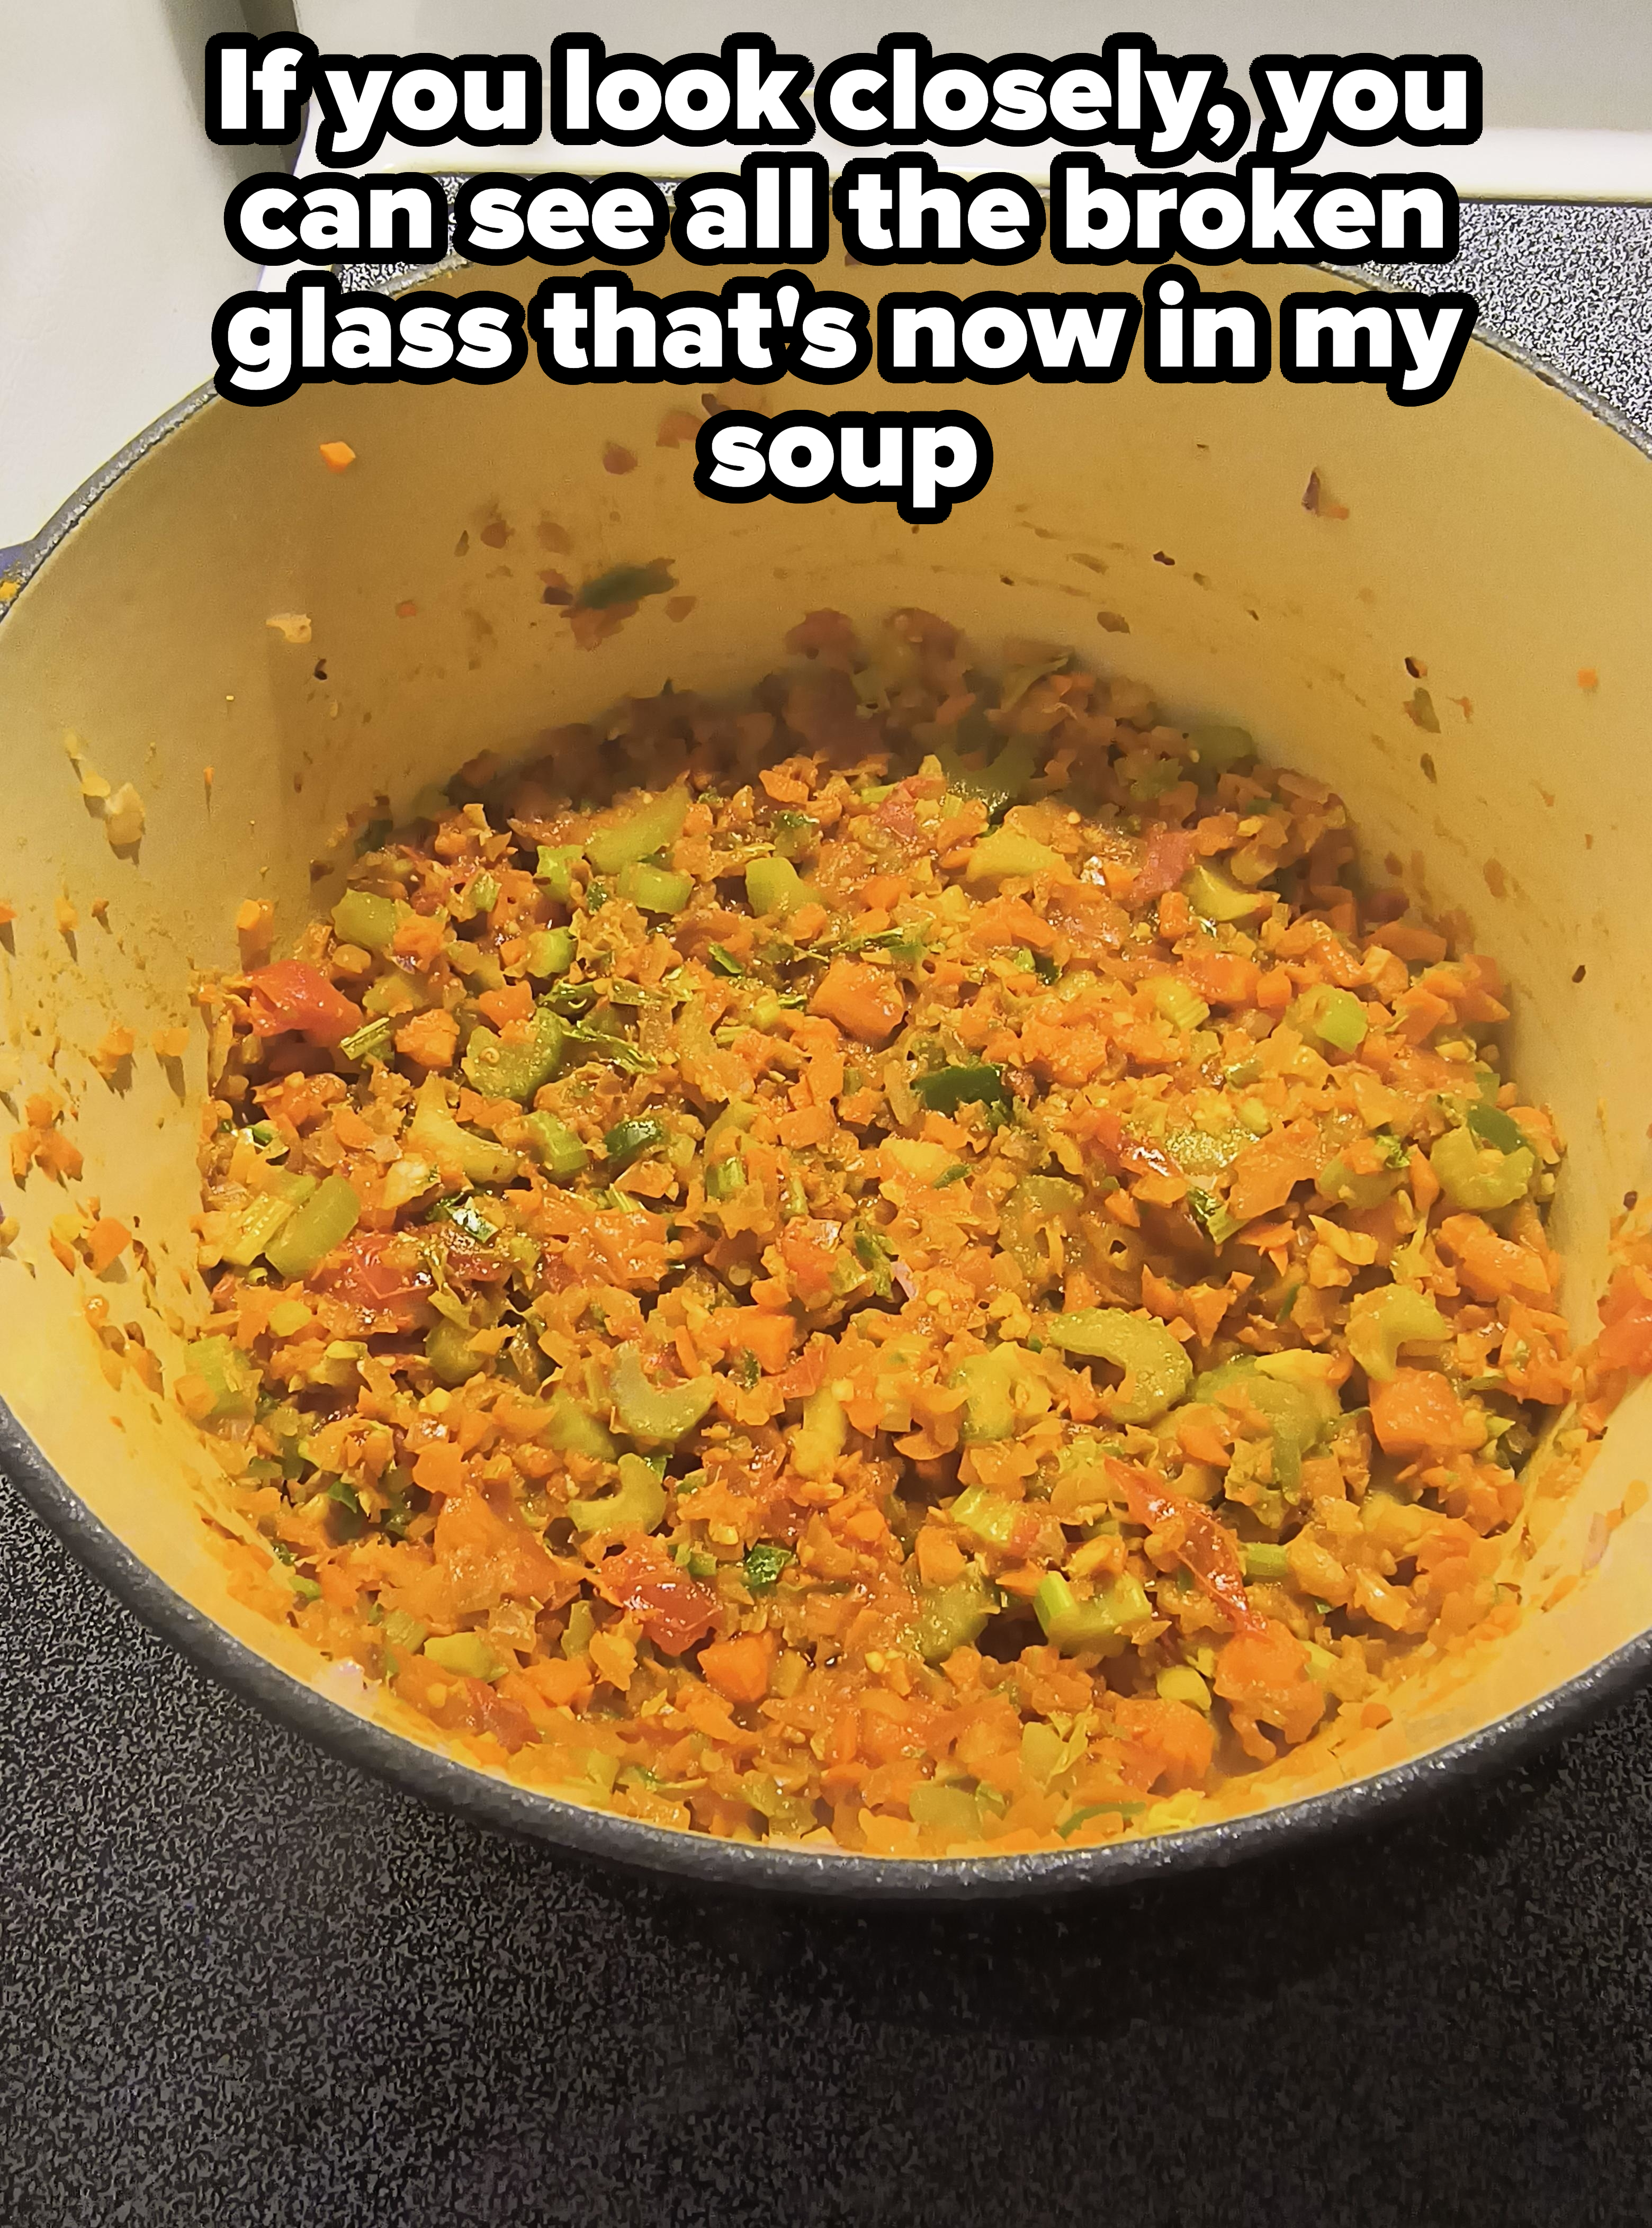 Pot with cooked mixed vegetables on a stovetop with small pieces of glass in it